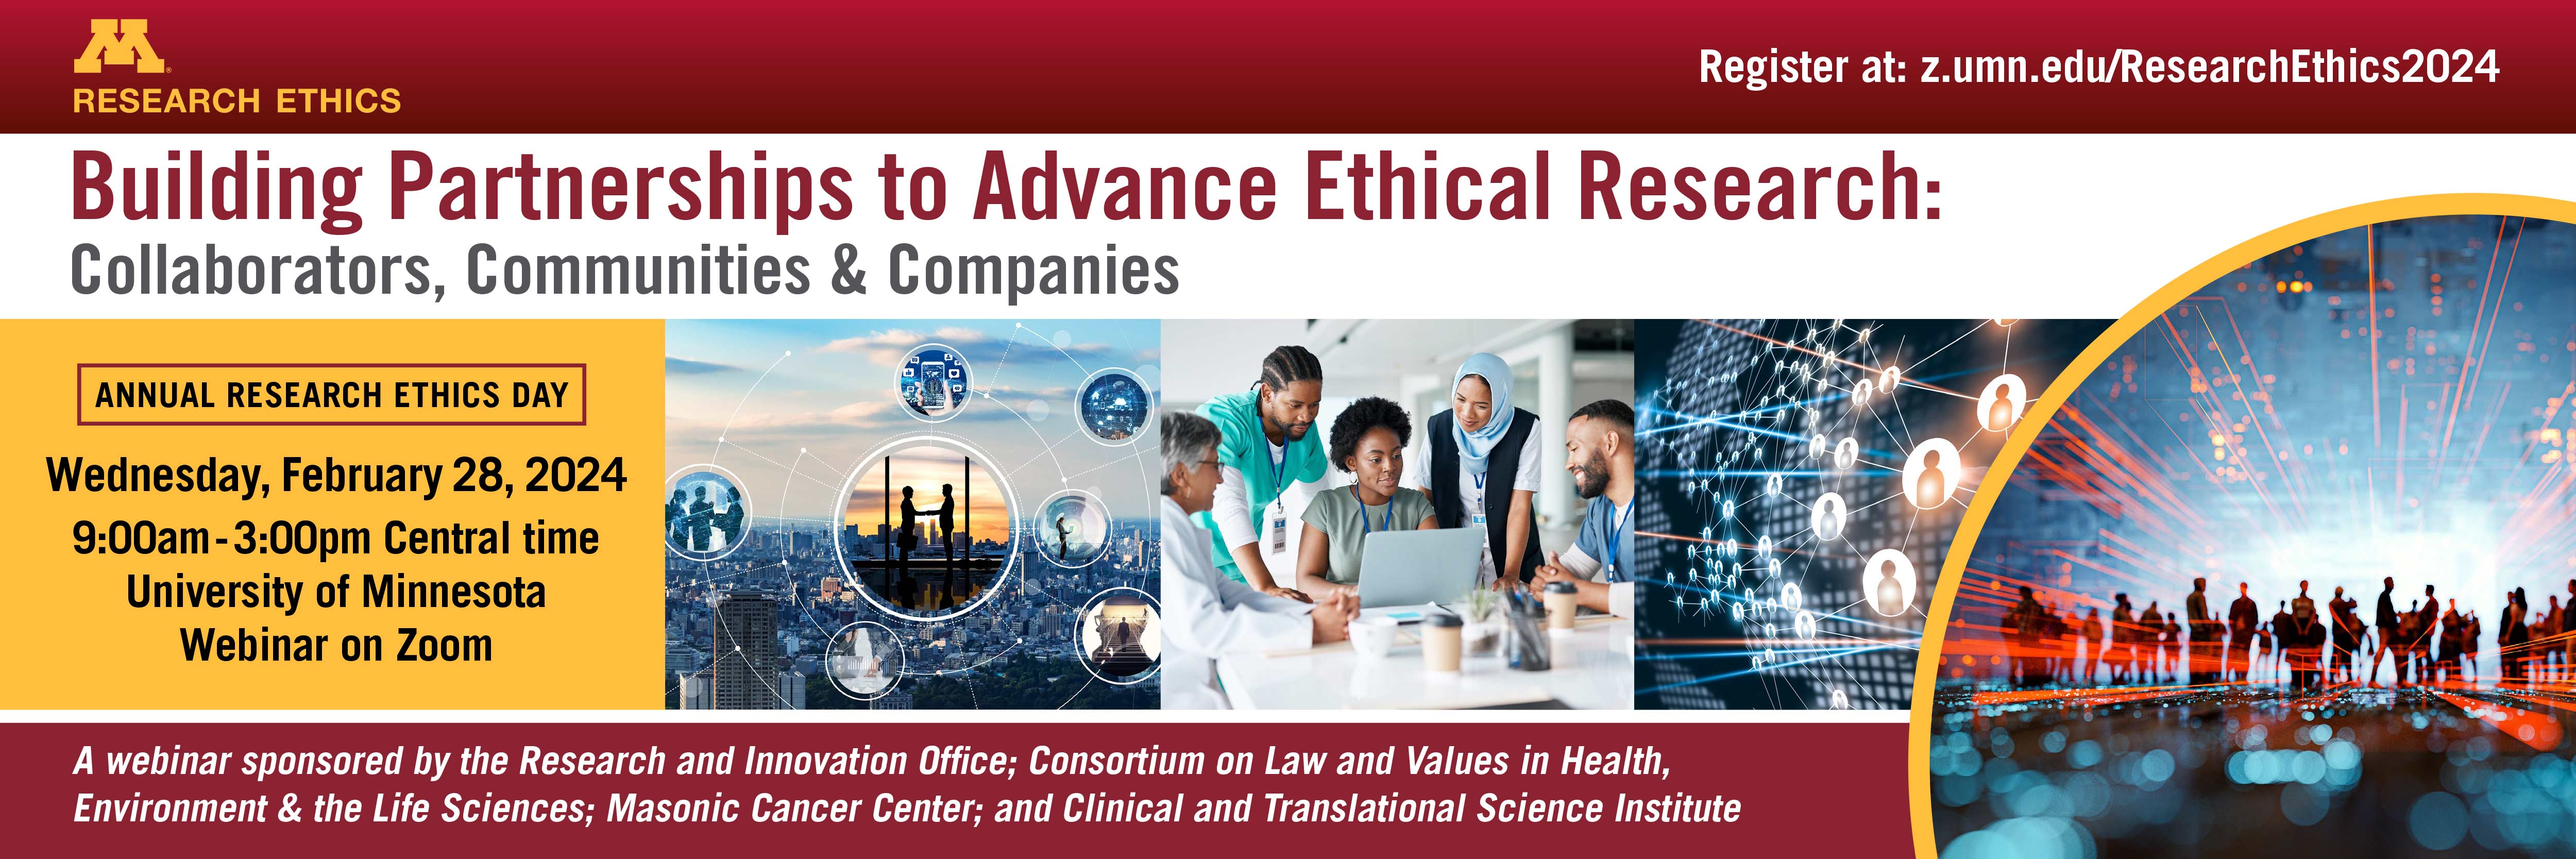 Research Ethics Day Banner